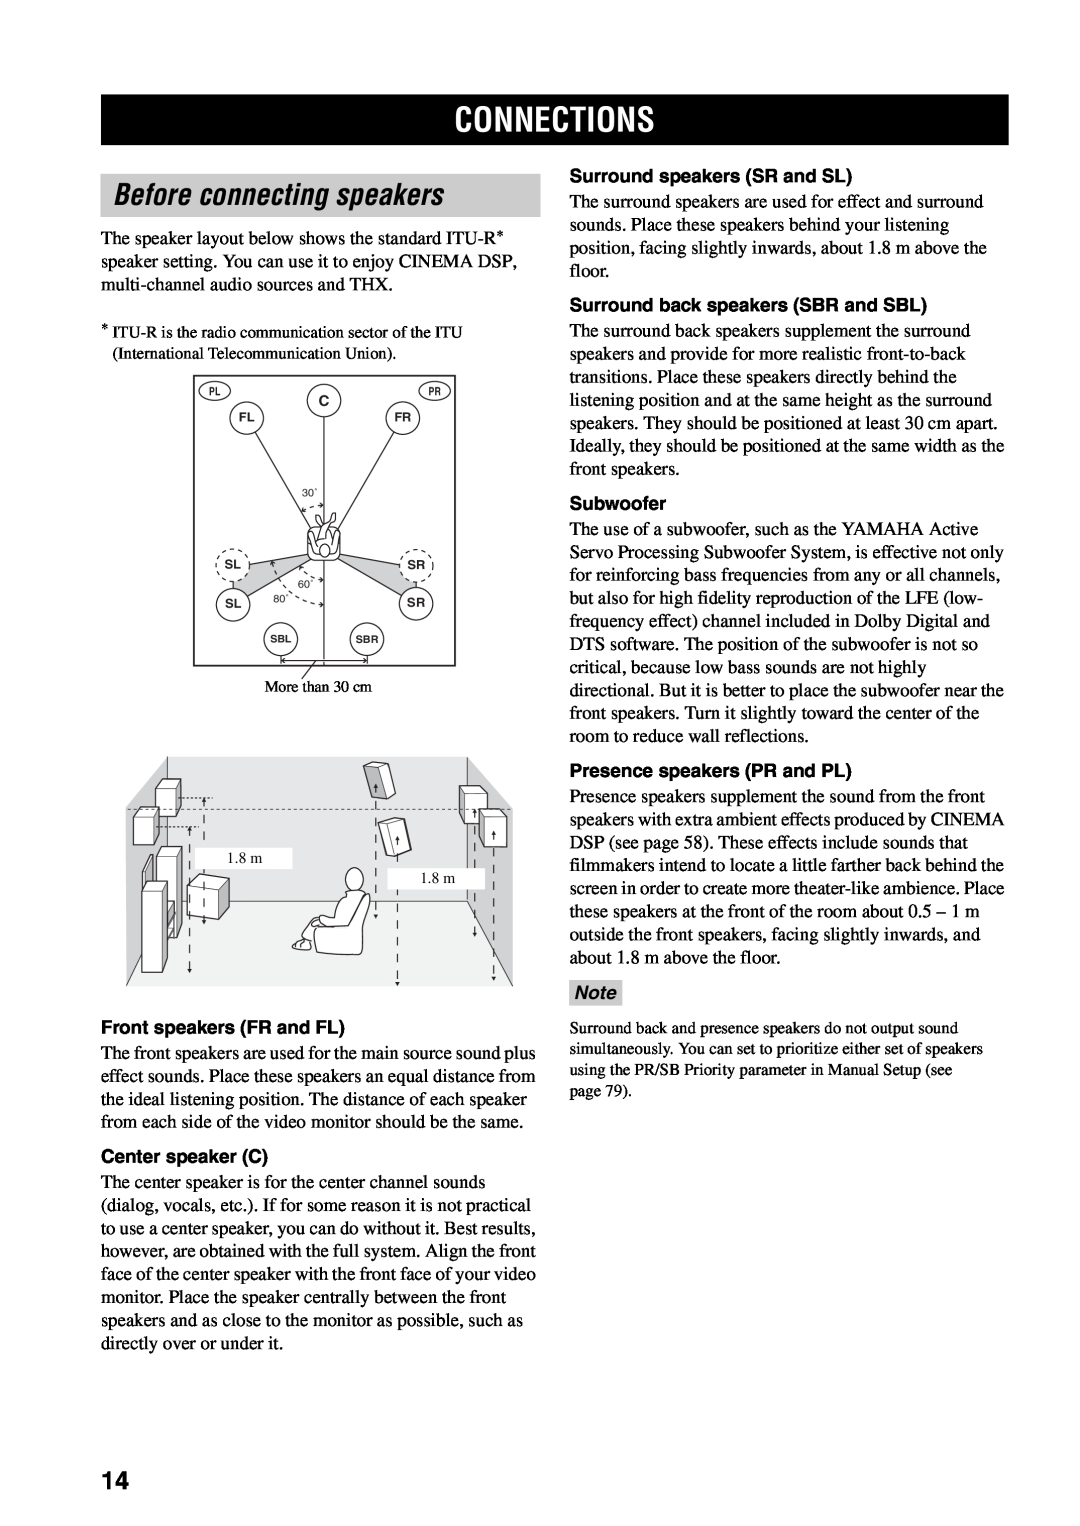 Yamaha RX-V2600 owner manual Connections, Before connecting speakers, Front speakers FR and FL, Center speaker C, Subwoofer 